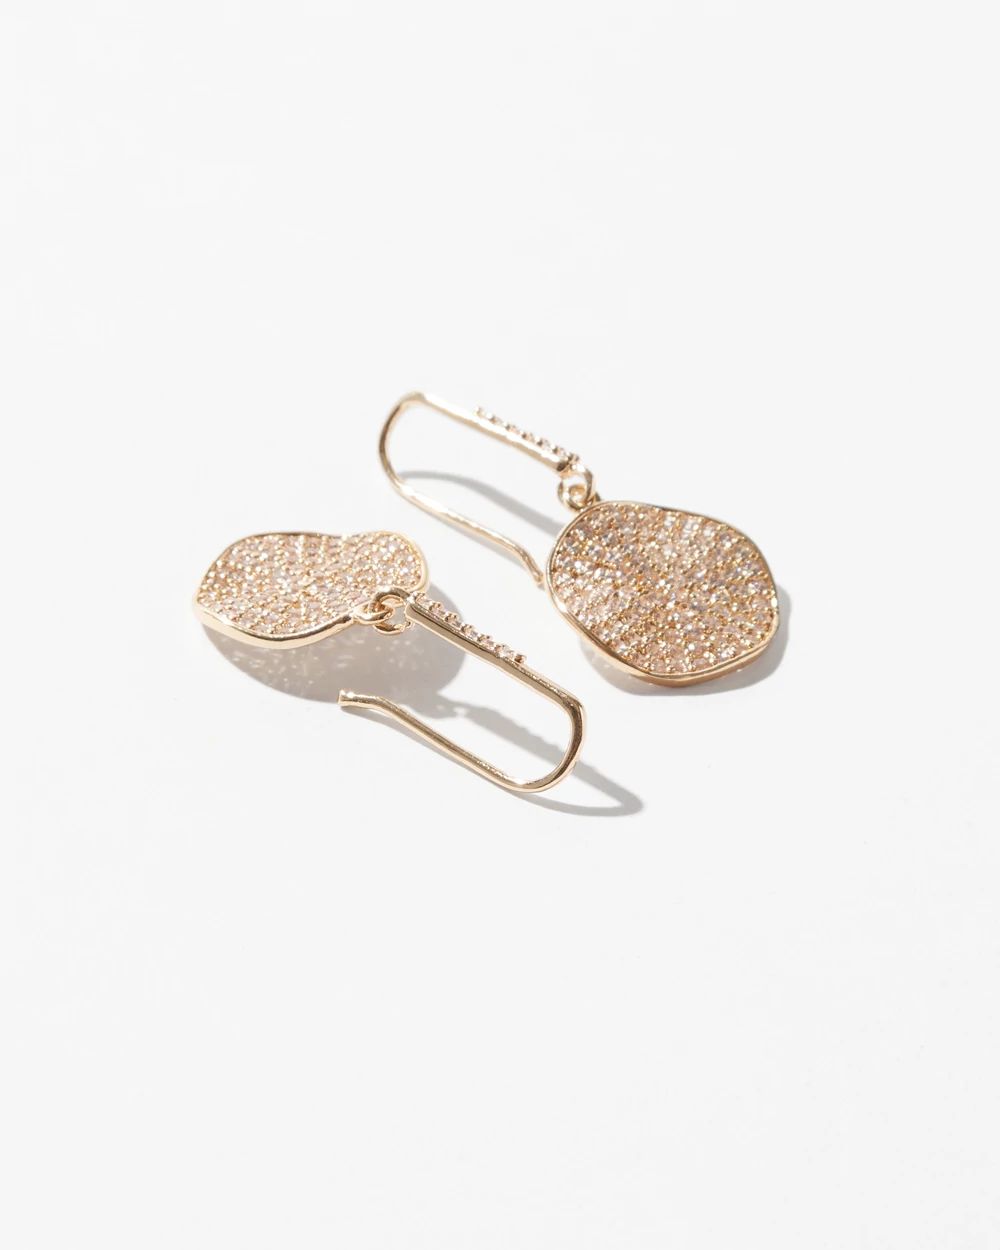 Gold Pave Disc Drop Earrings click to view larger image.